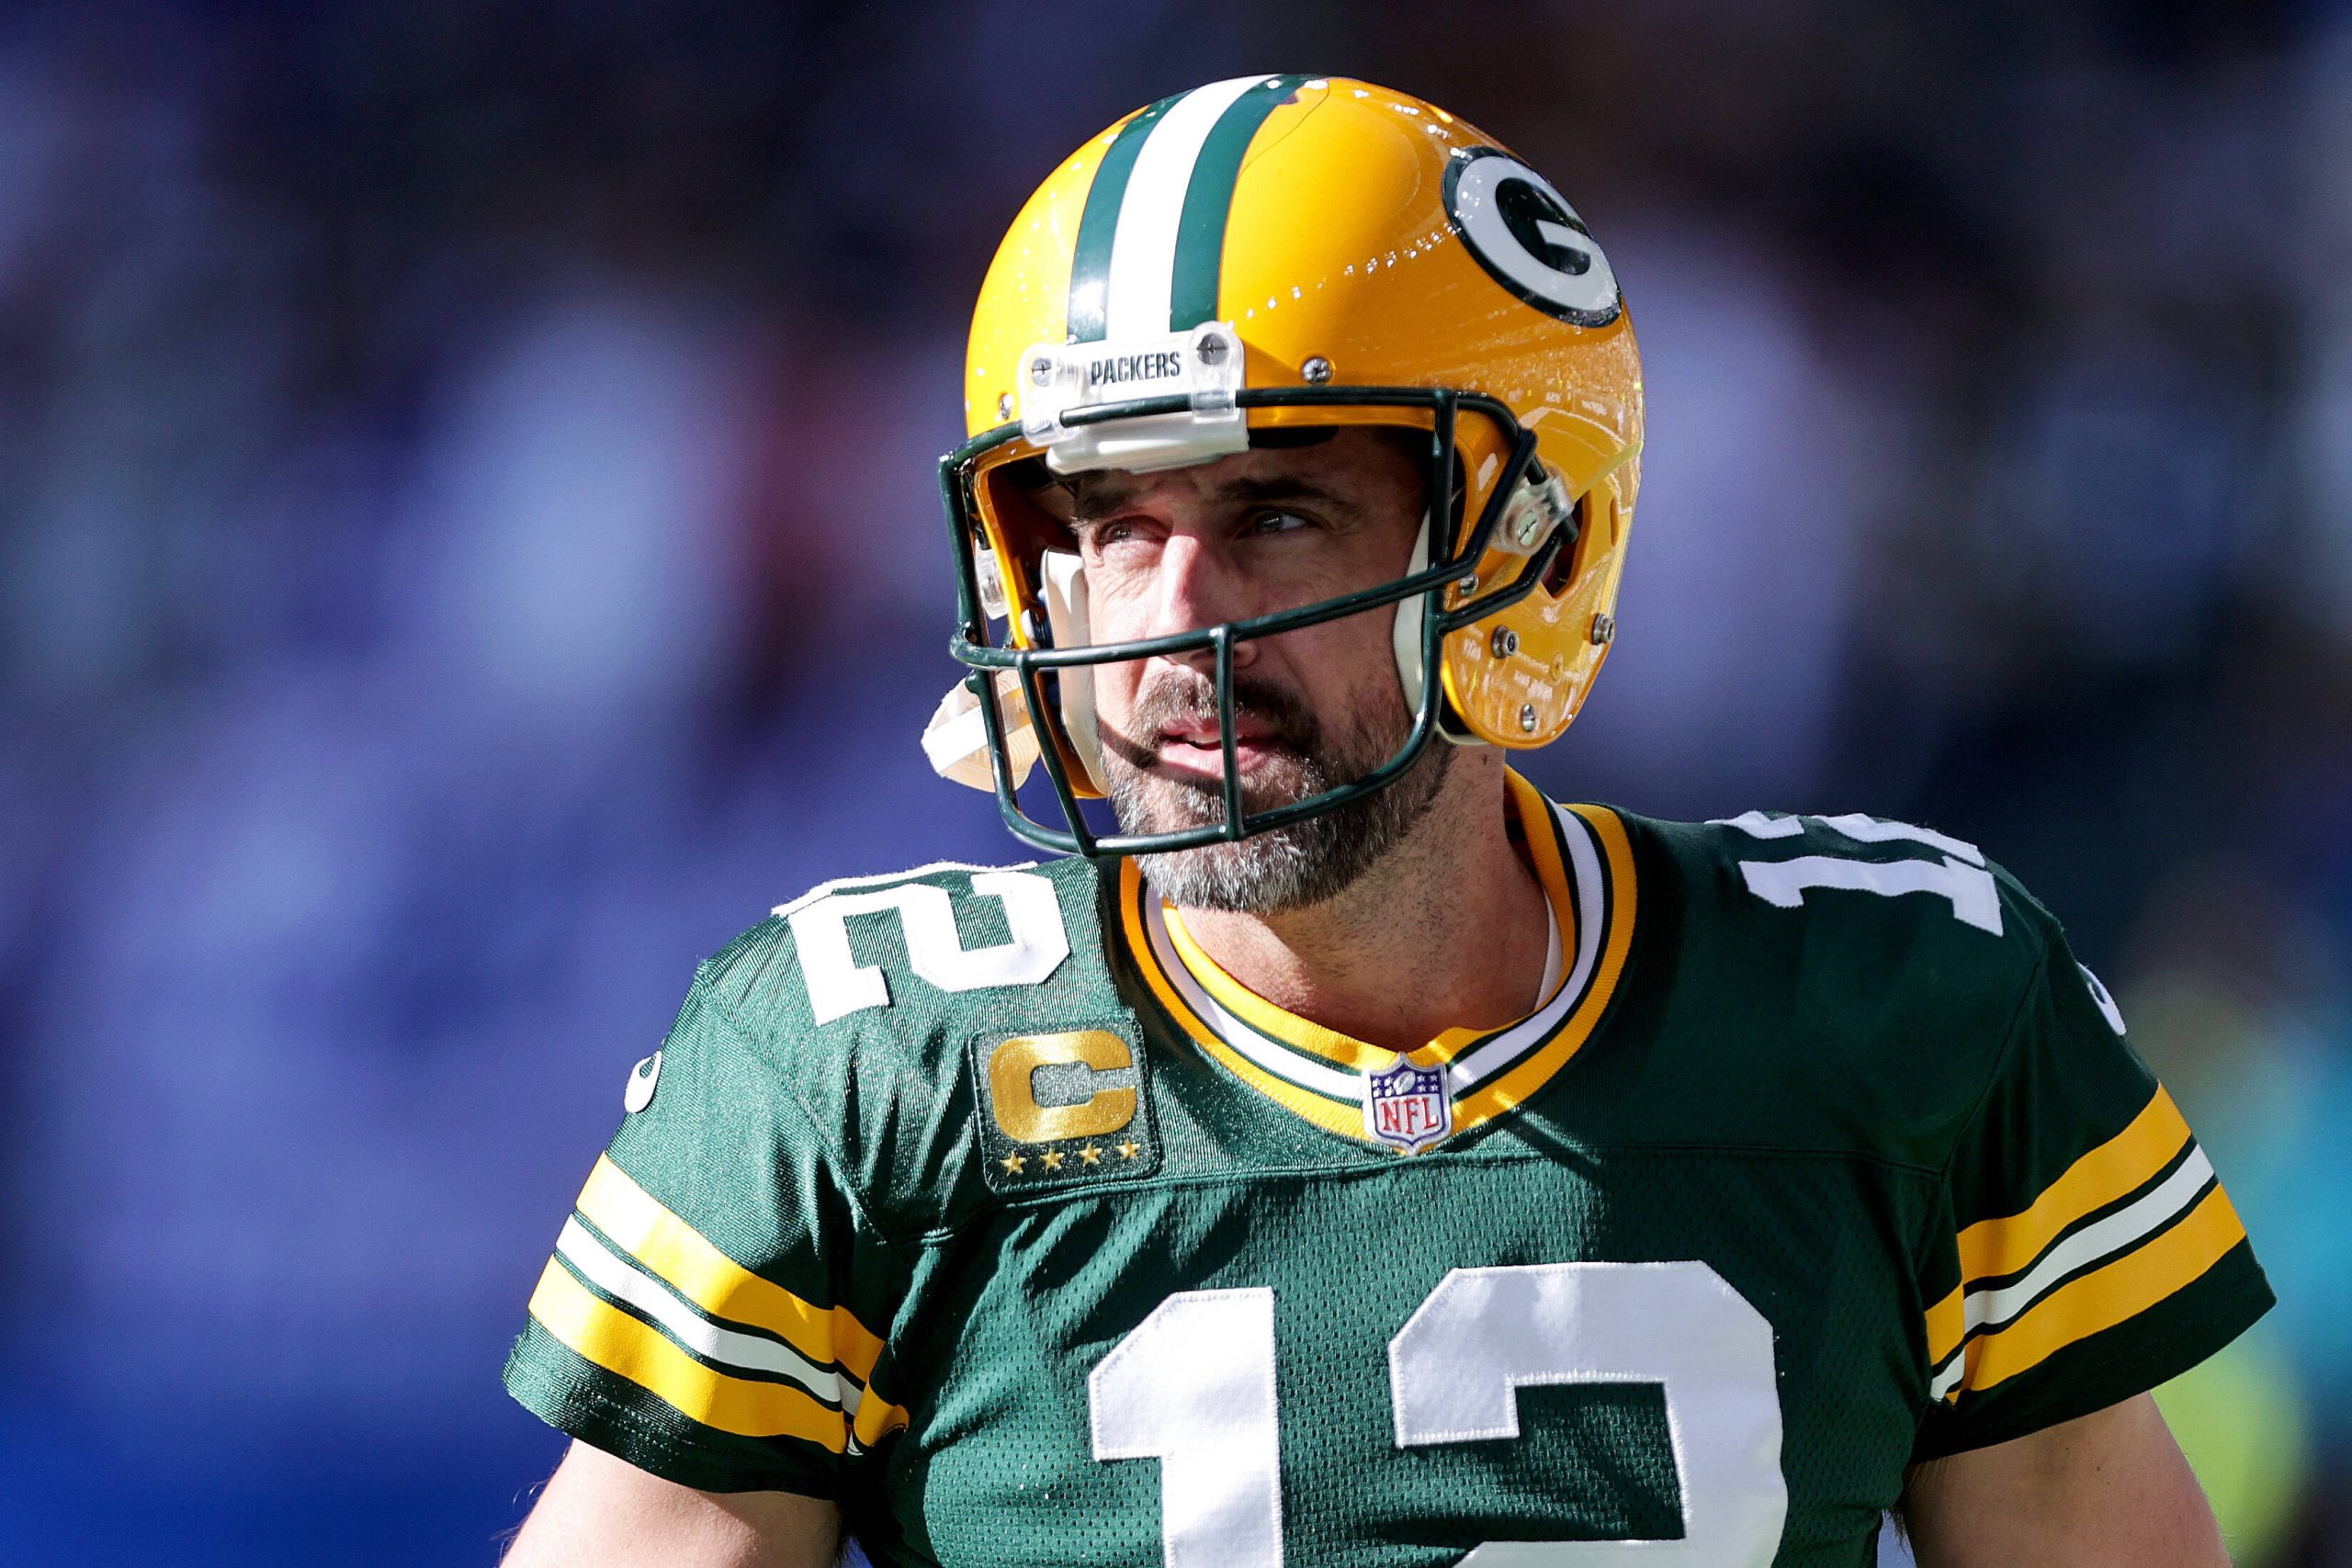 2022 NFL, American Football Herren, USA London Games, Tottenham Hotspur Stadium, London, England 9/10/2021 New York Giants vs Green Bay Packers Green Bay Packers Aaron Rodgers during the warm-up Aaron Rodgers during the warm-up 9/10/2022 PUBLICATIONxNOTxINxUKxIRLxFRAxNZL Copyright: x INPHO/LaszloxGeczox LG1_0313